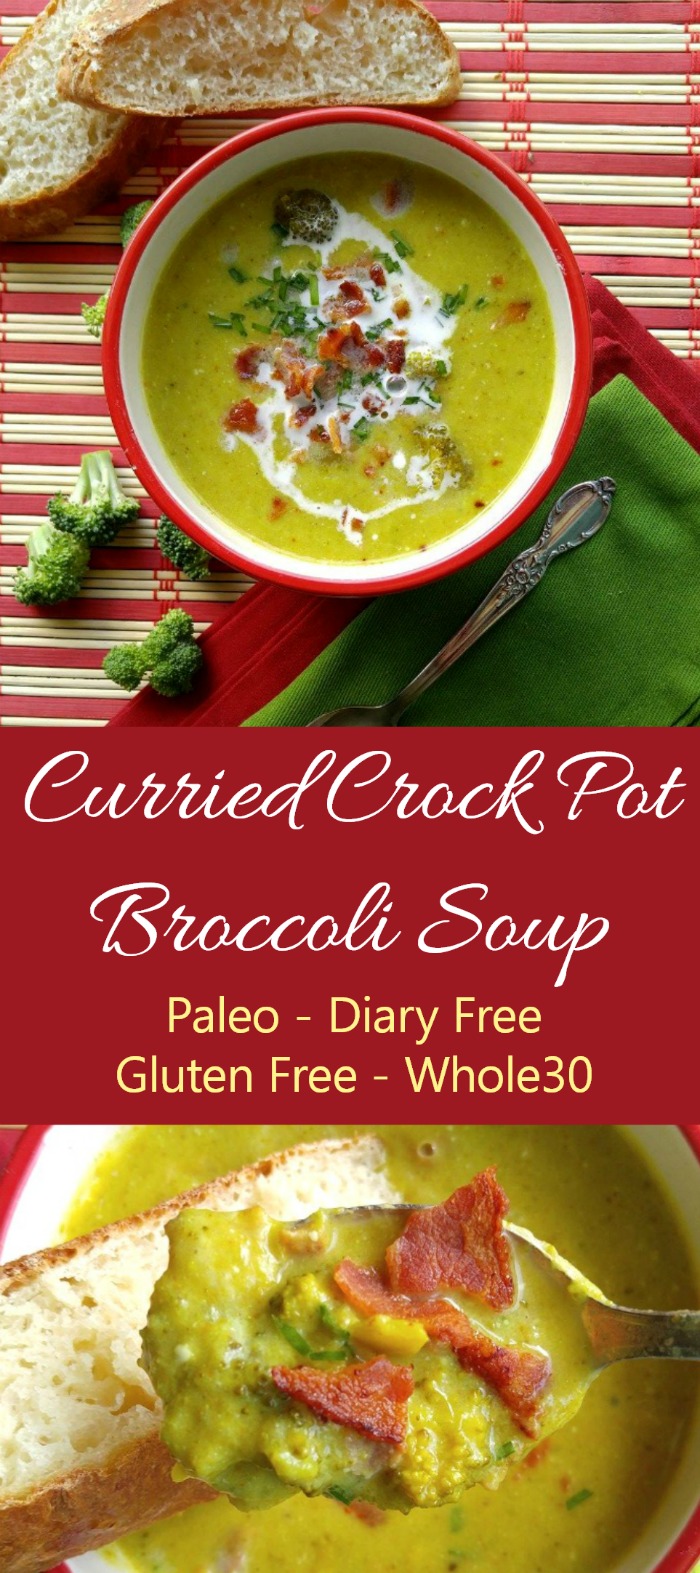 This curried crock pot broccoli soup is hearty and creamy. It has a lovely savory taste without too much heat. Serve it with some gluten free bread for a Paleo meal. Also Whole30 compliant if you omit the bread.